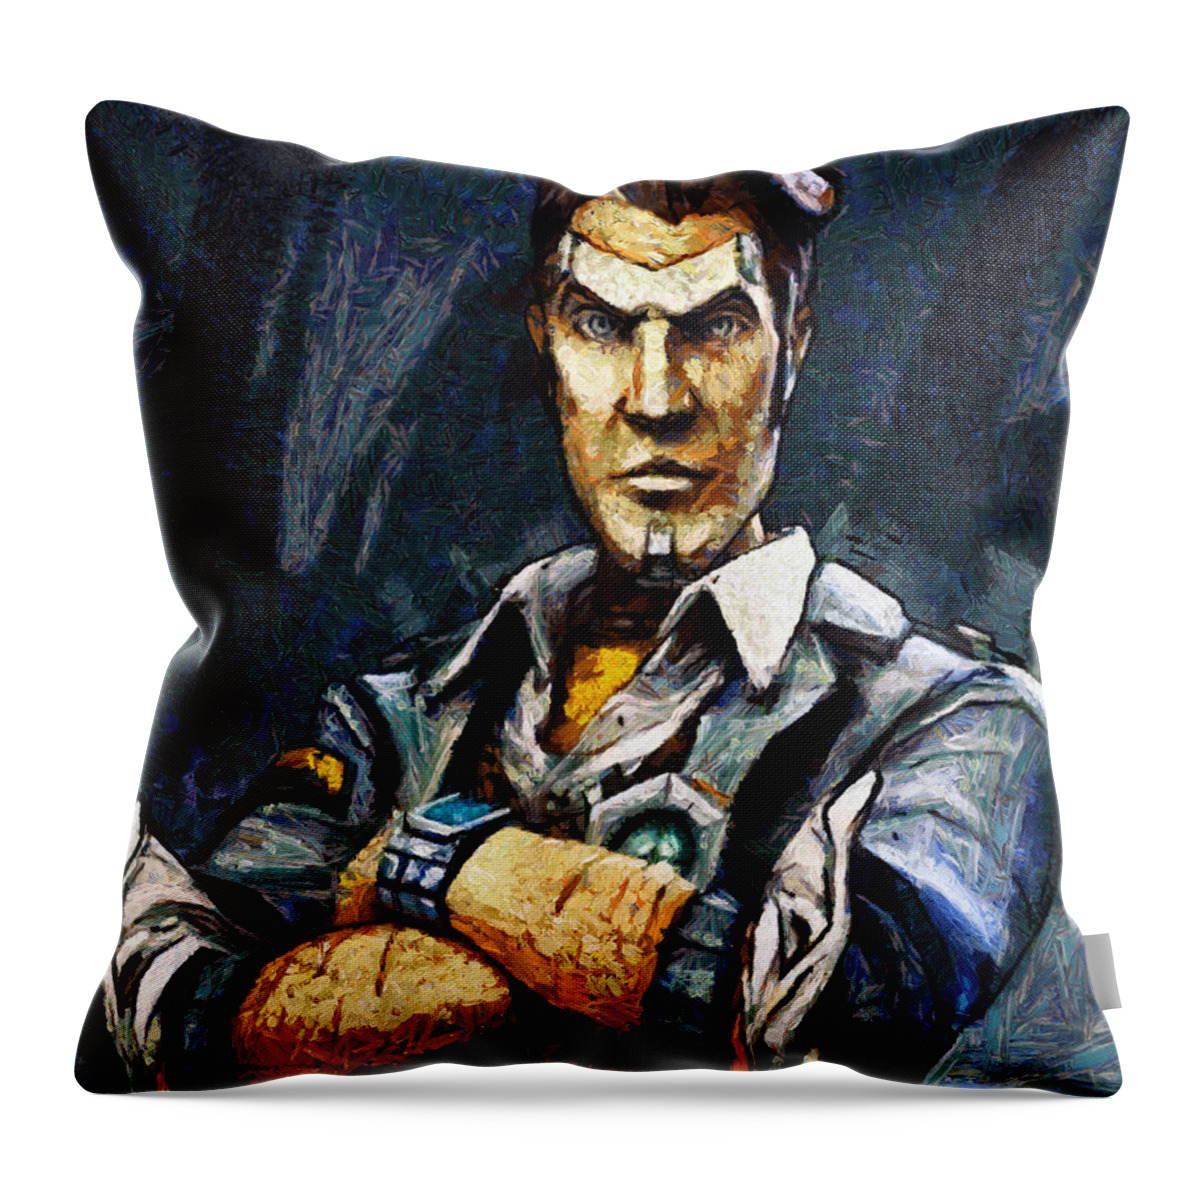 Www.themidnightstreets.net Throw Pillow featuring the painting Hey Vault Hunter Handsome Jack Here by Joe Misrasi